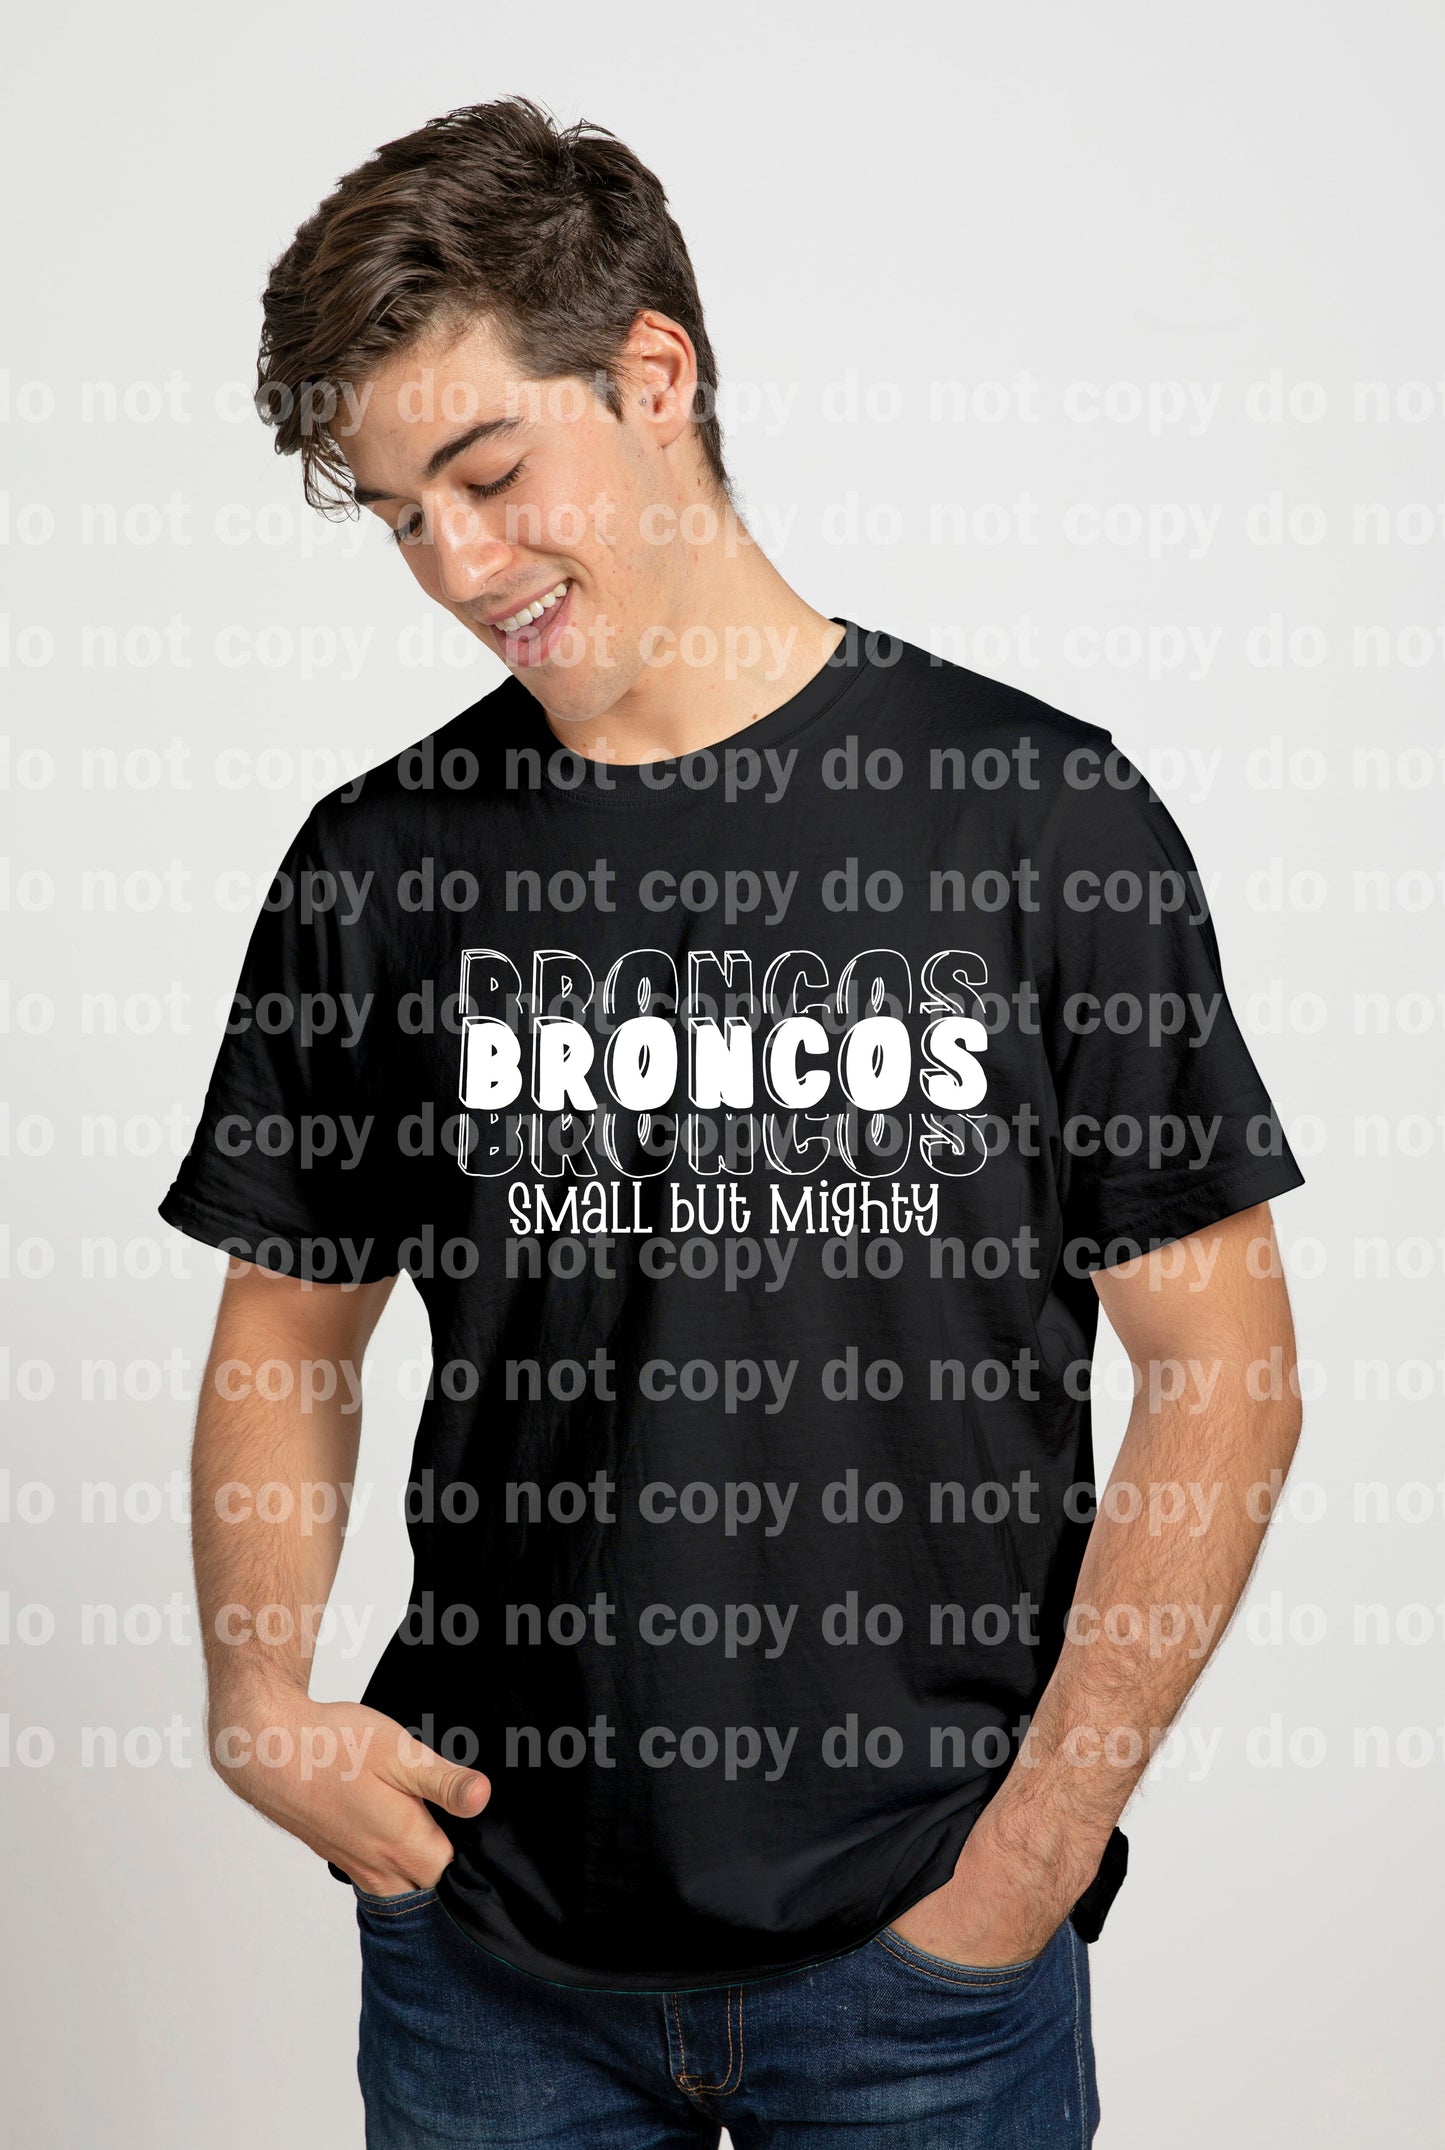 Broncos Small But Mighty Black/White Dream Print or Sublimation Print